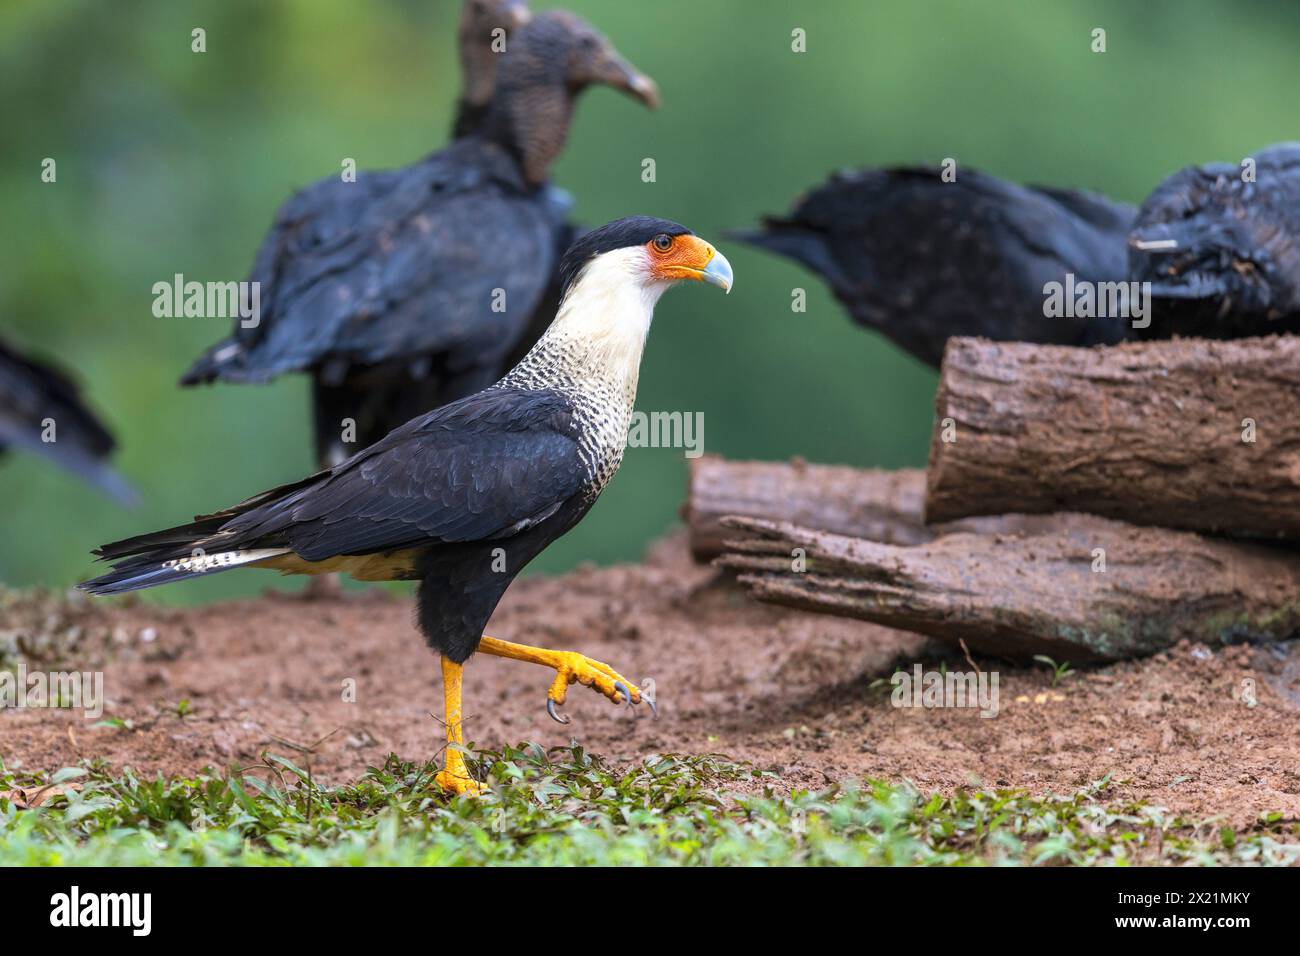 Northern Crested Caracara (Caracara cheriway), runs between black vultures on the ground and searches for food, Costa Rica, Boca Tapada Stock Photo